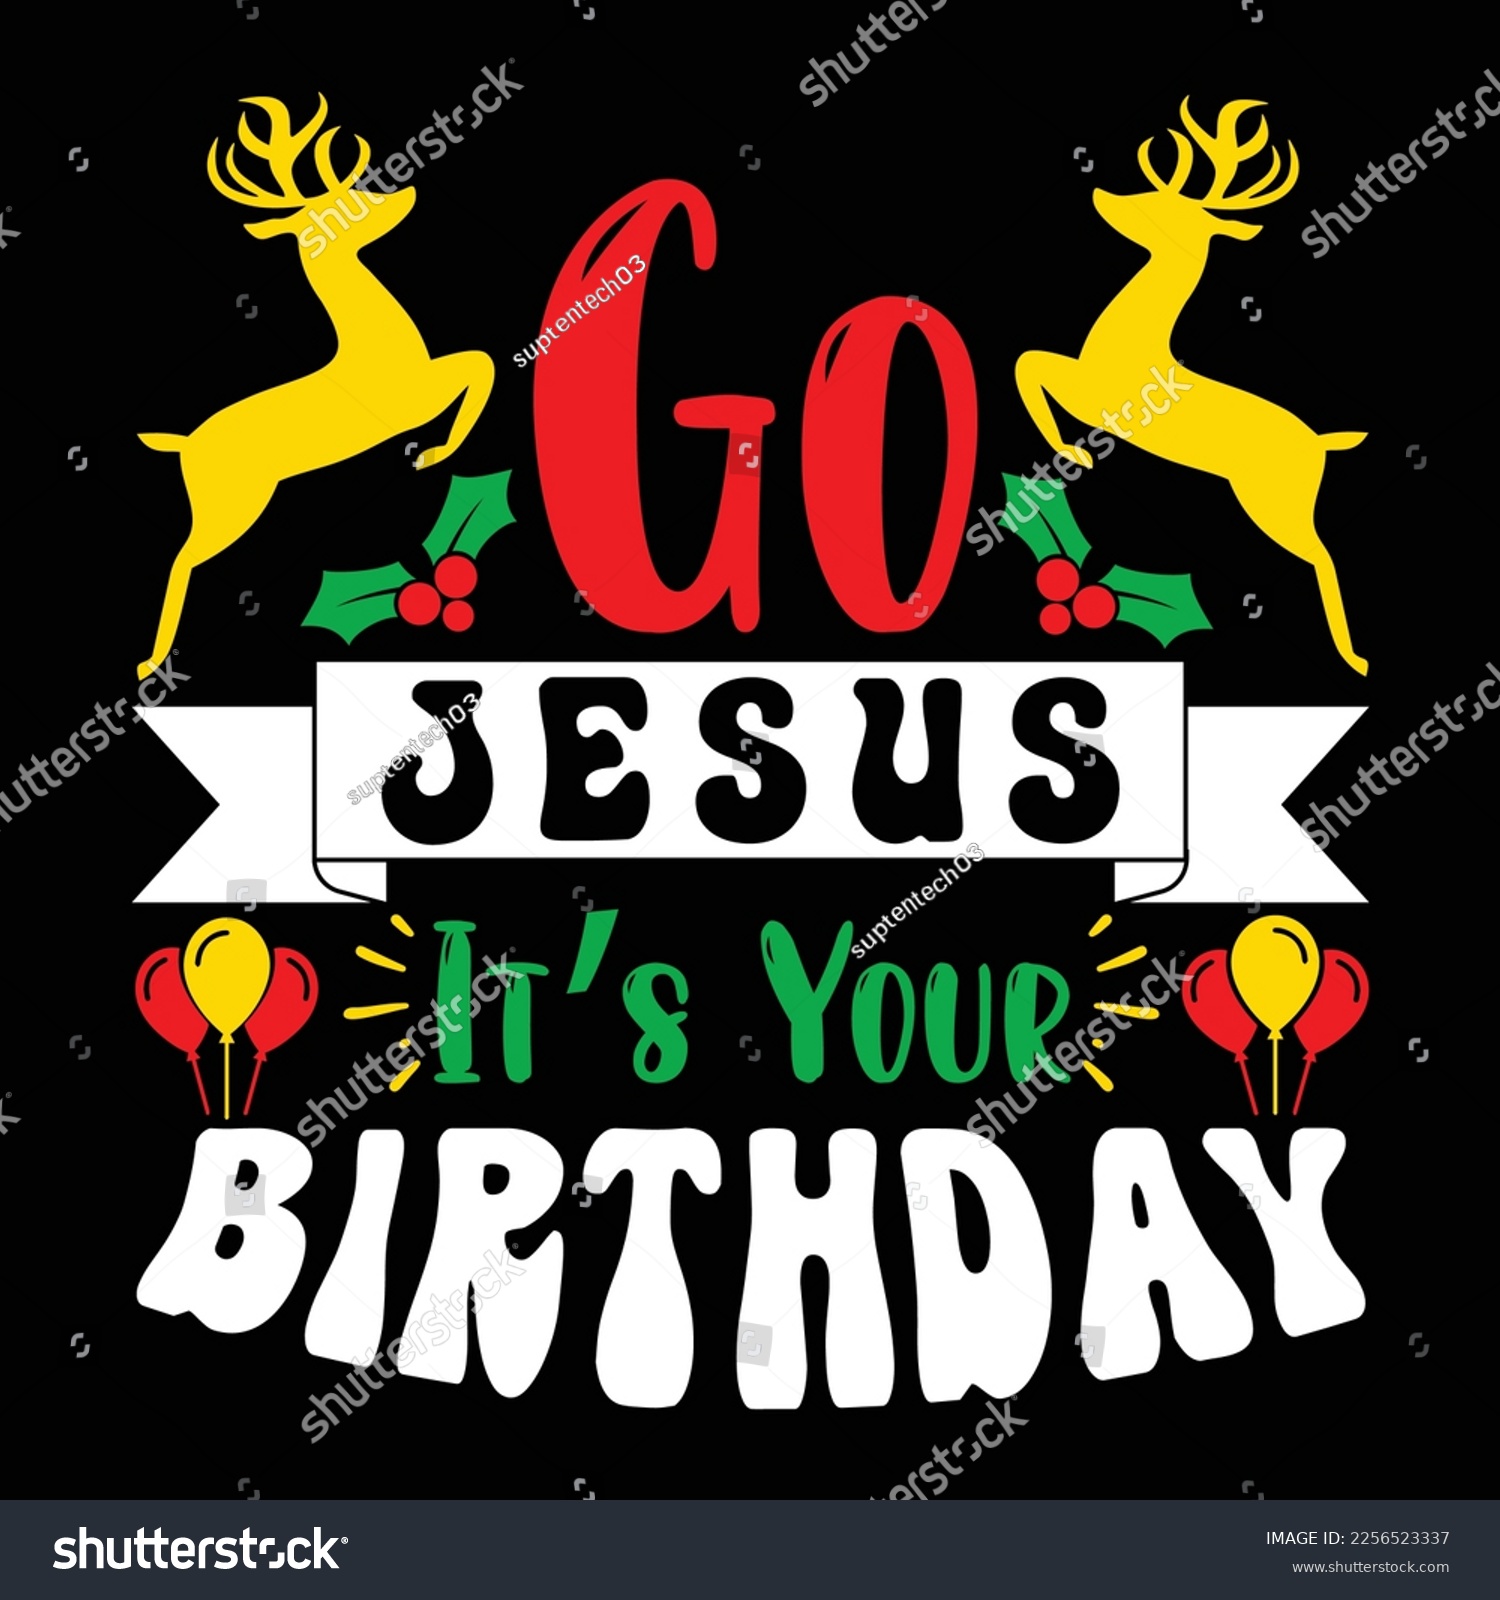 SVG of Go Jesus It's Your Birthday, Merry Christmas shirts Print Template, Xmas Ugly Snow Santa Clouse New Year Holiday Candy Santa Hat vector illustration for Christmas hand lettered svg